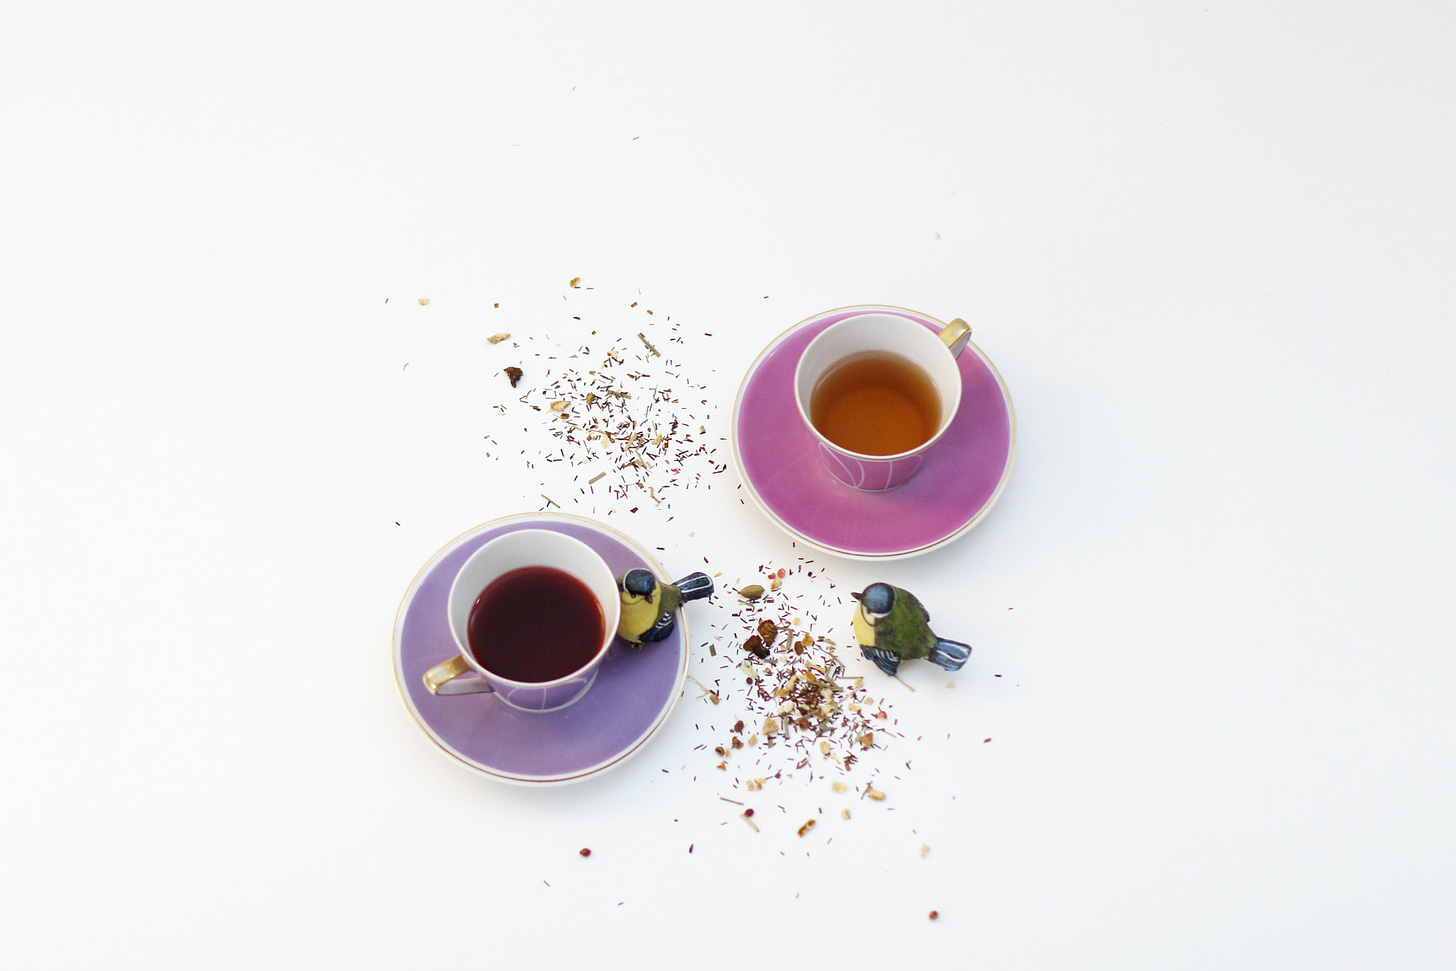 Two cups of tea with two bird statues by Katrin Hauf via Unsplash.